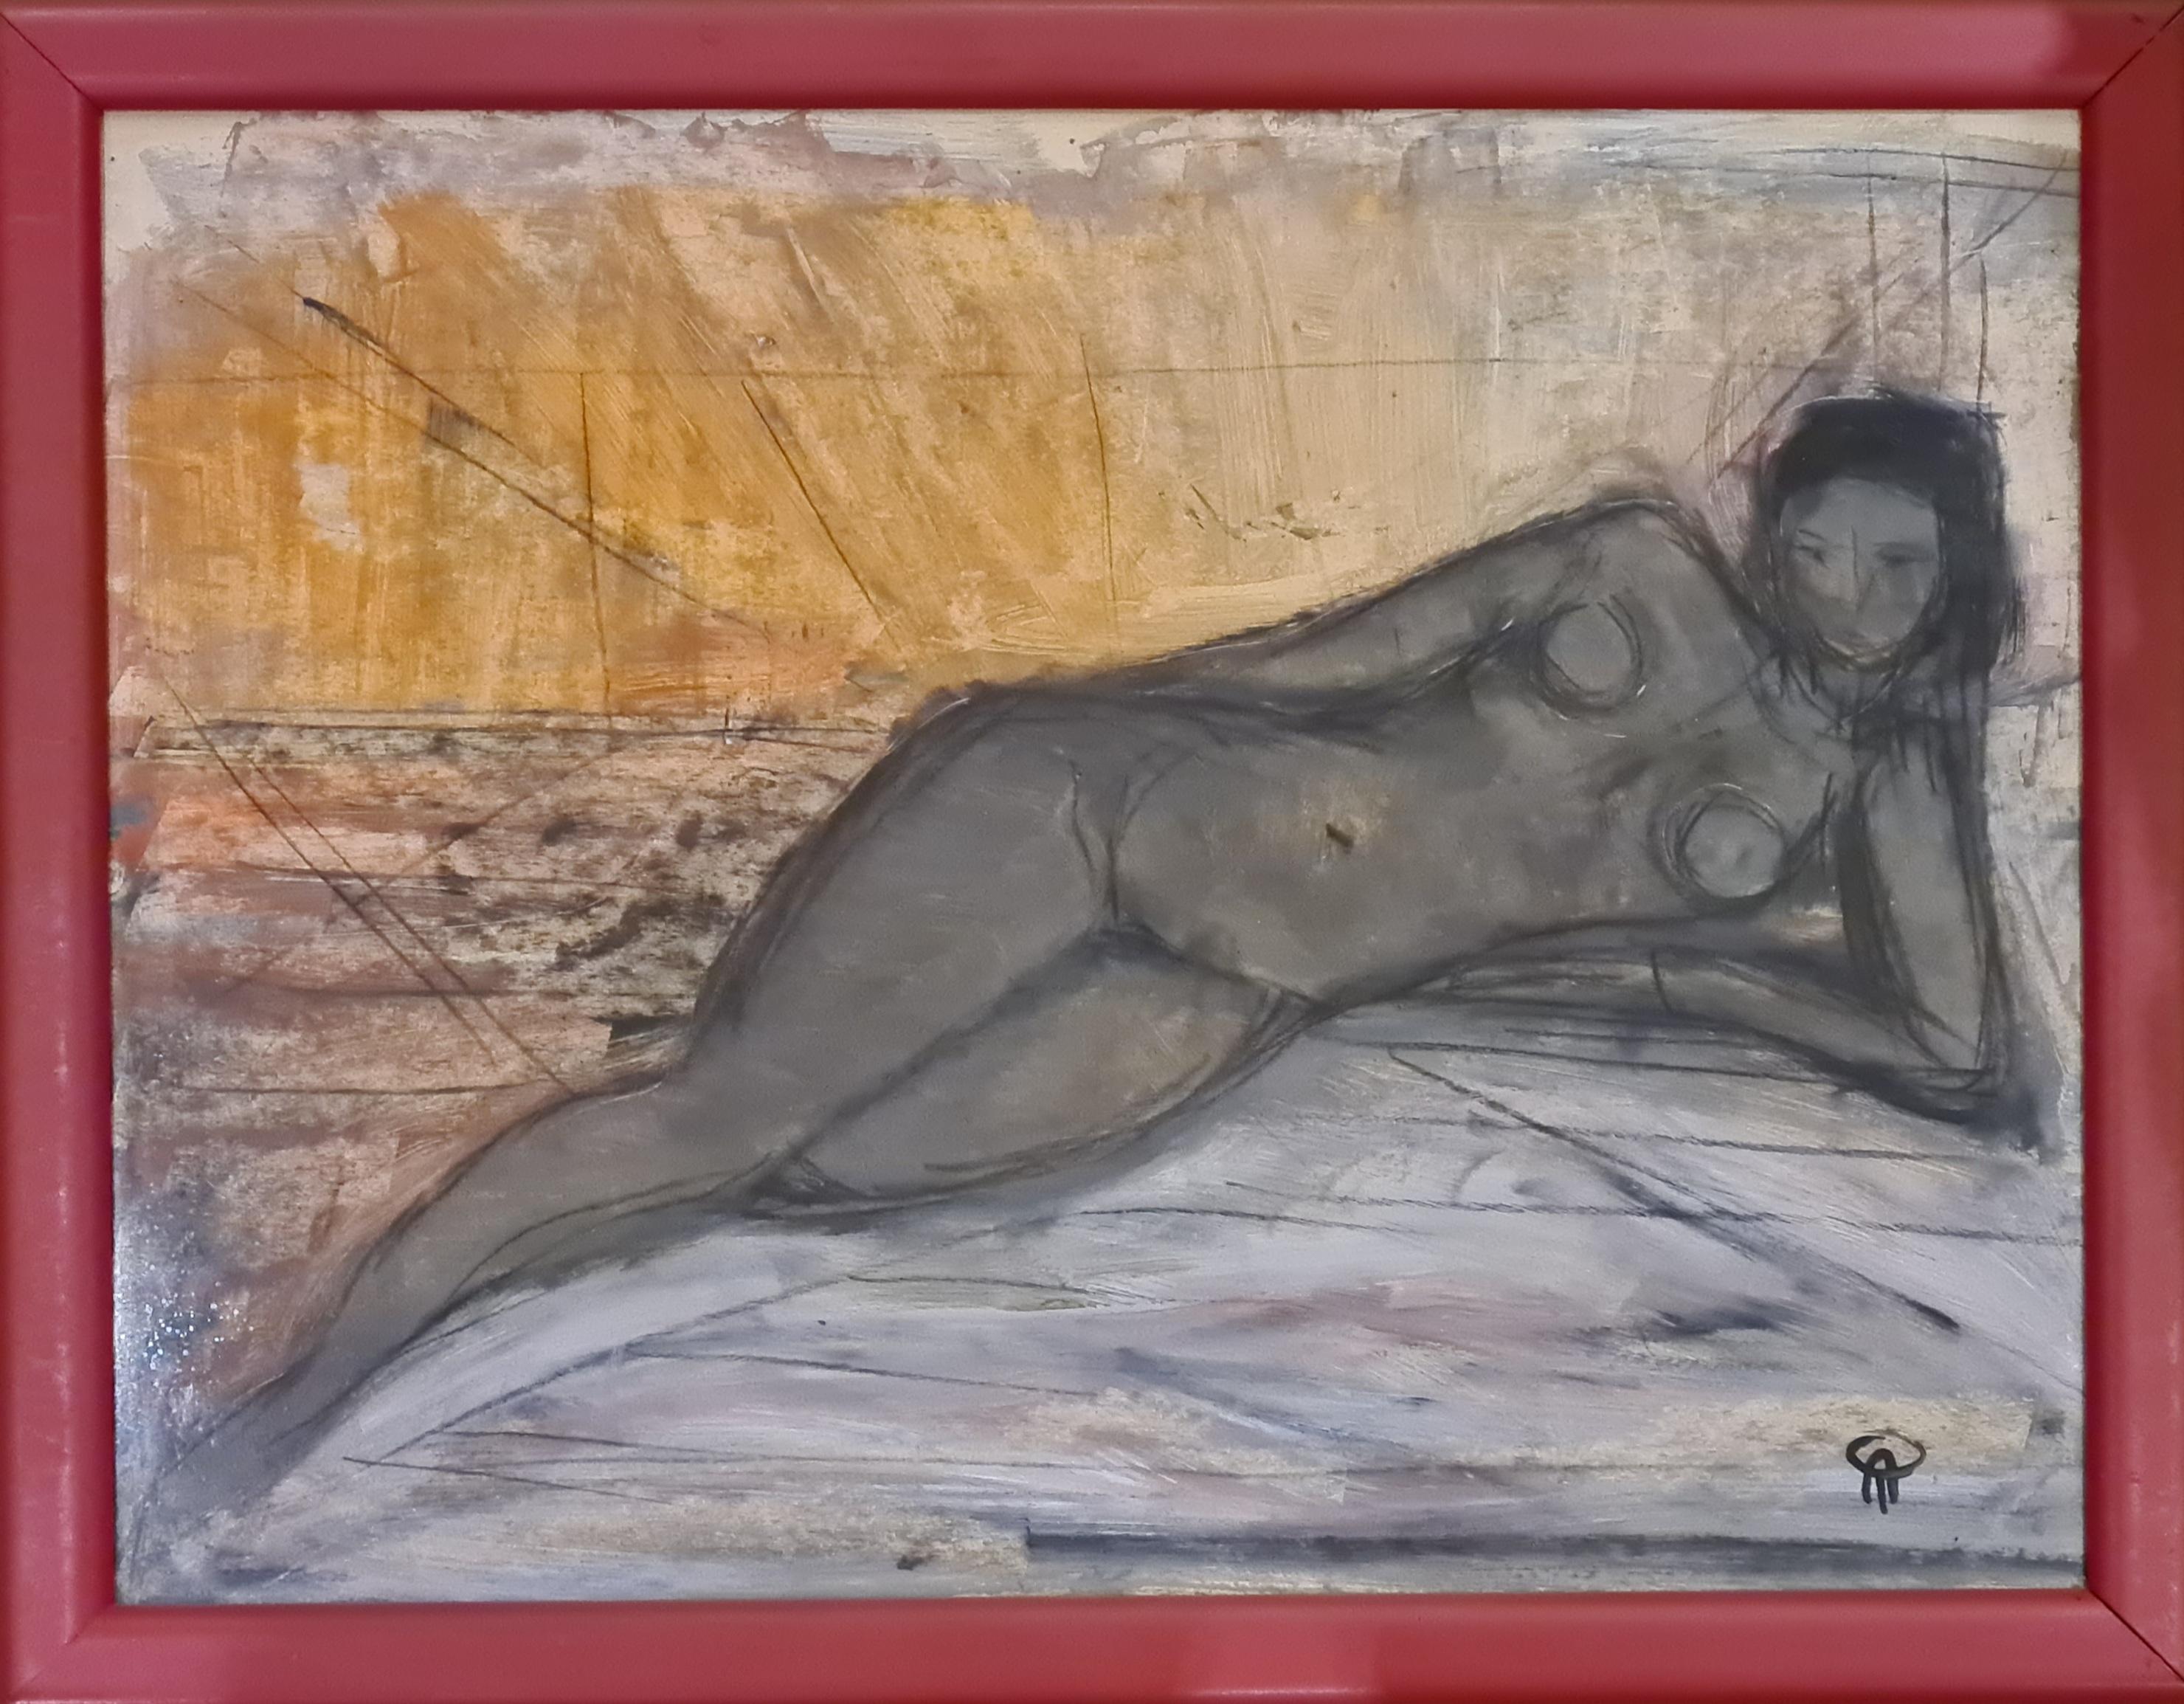 A mid 20th century modern work on paper of a female nude by Andre Petroff. Signed with monogram bottom right, presented under glass in plain red painted wood frame. The work was acquired directly from the estate of his daughter.

PETROV ANDREY